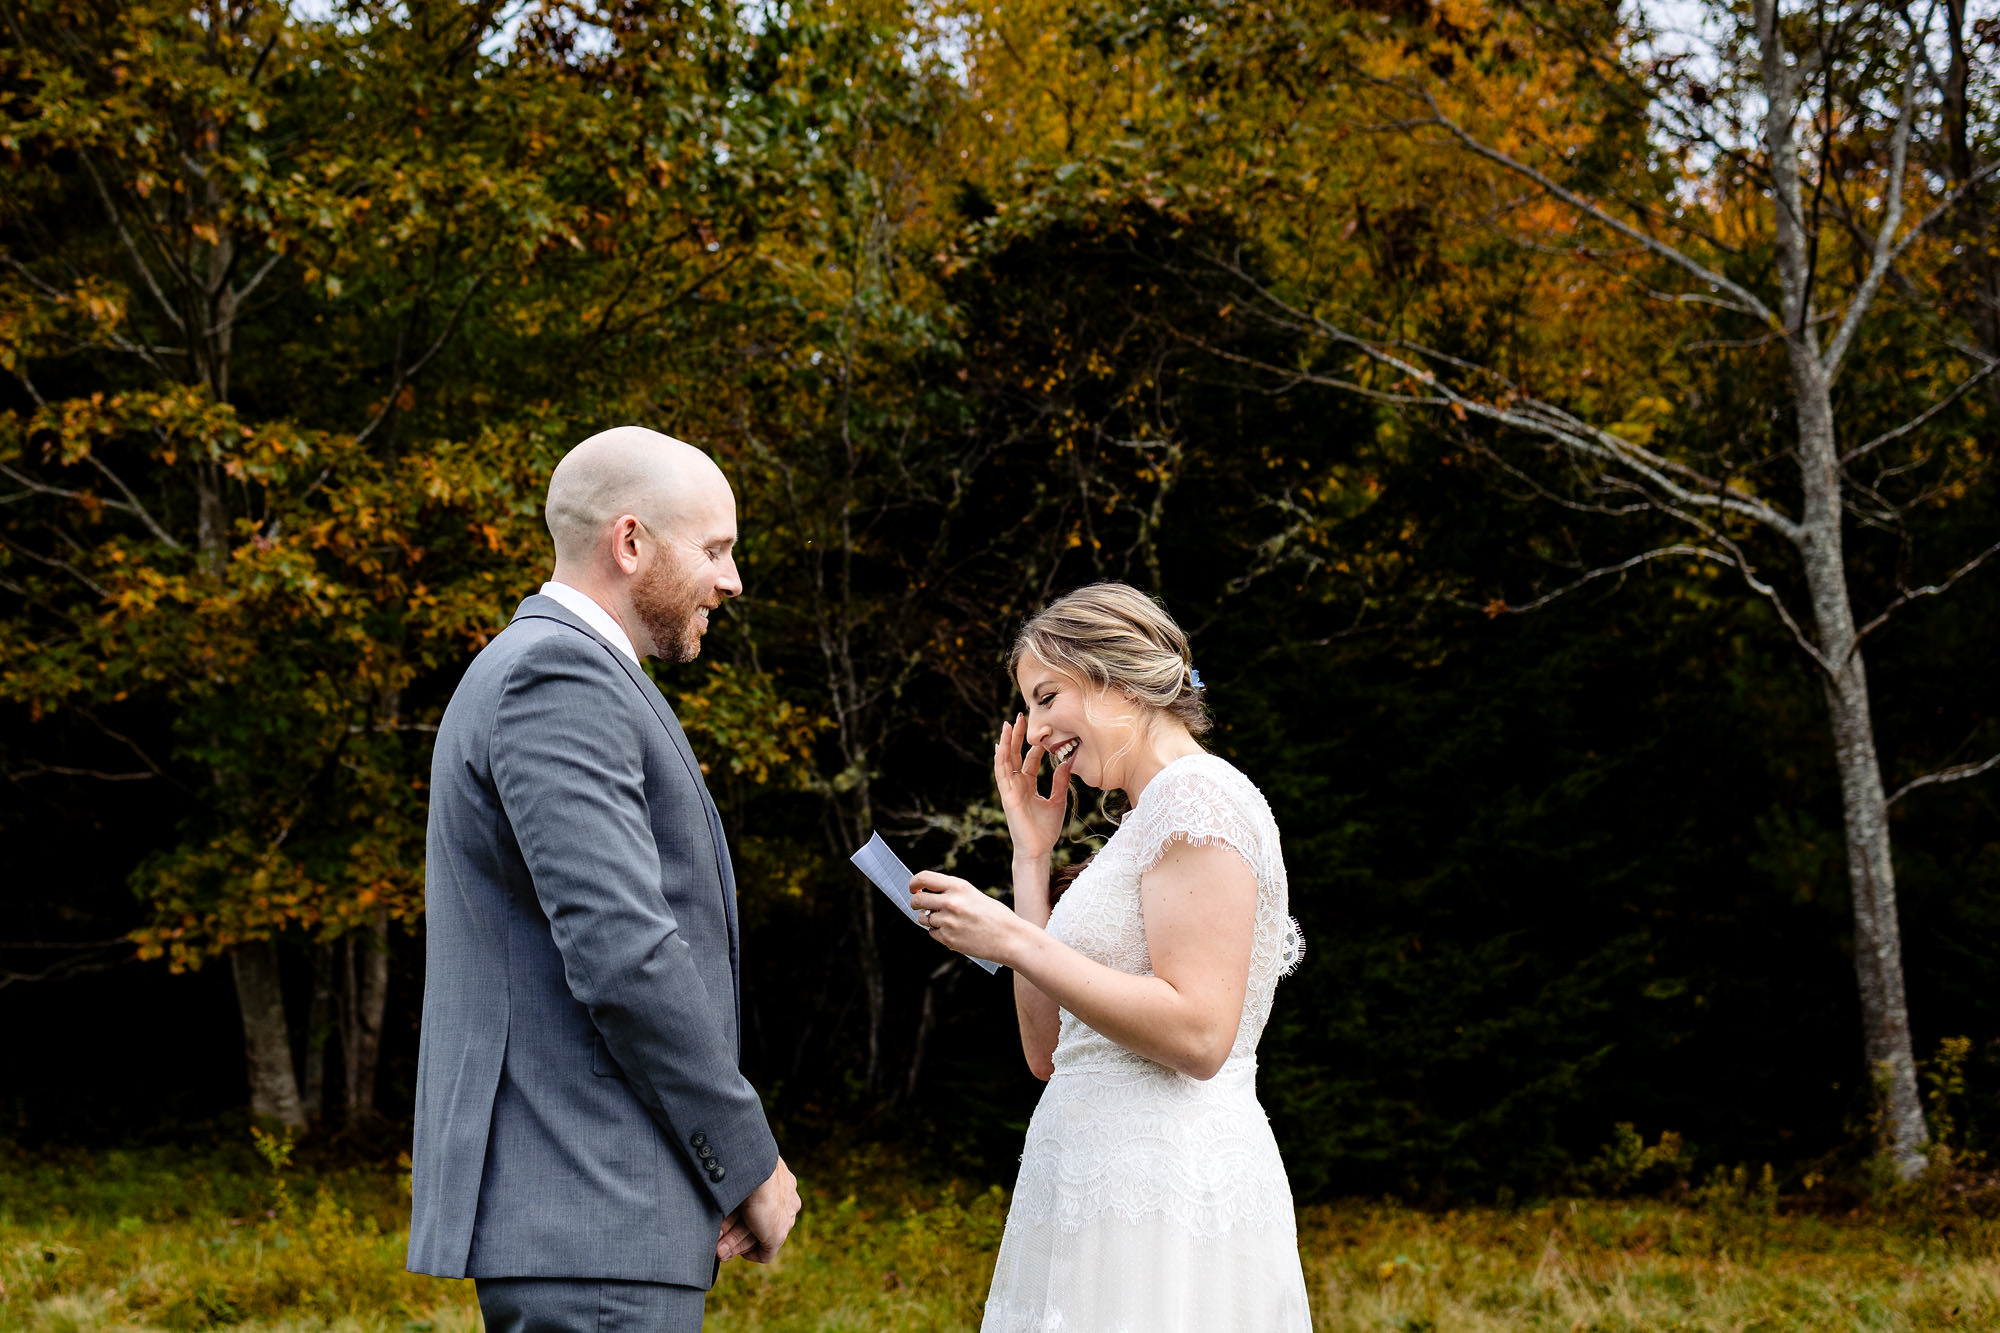 An Acadia elopement where the couple reads their vows to one another